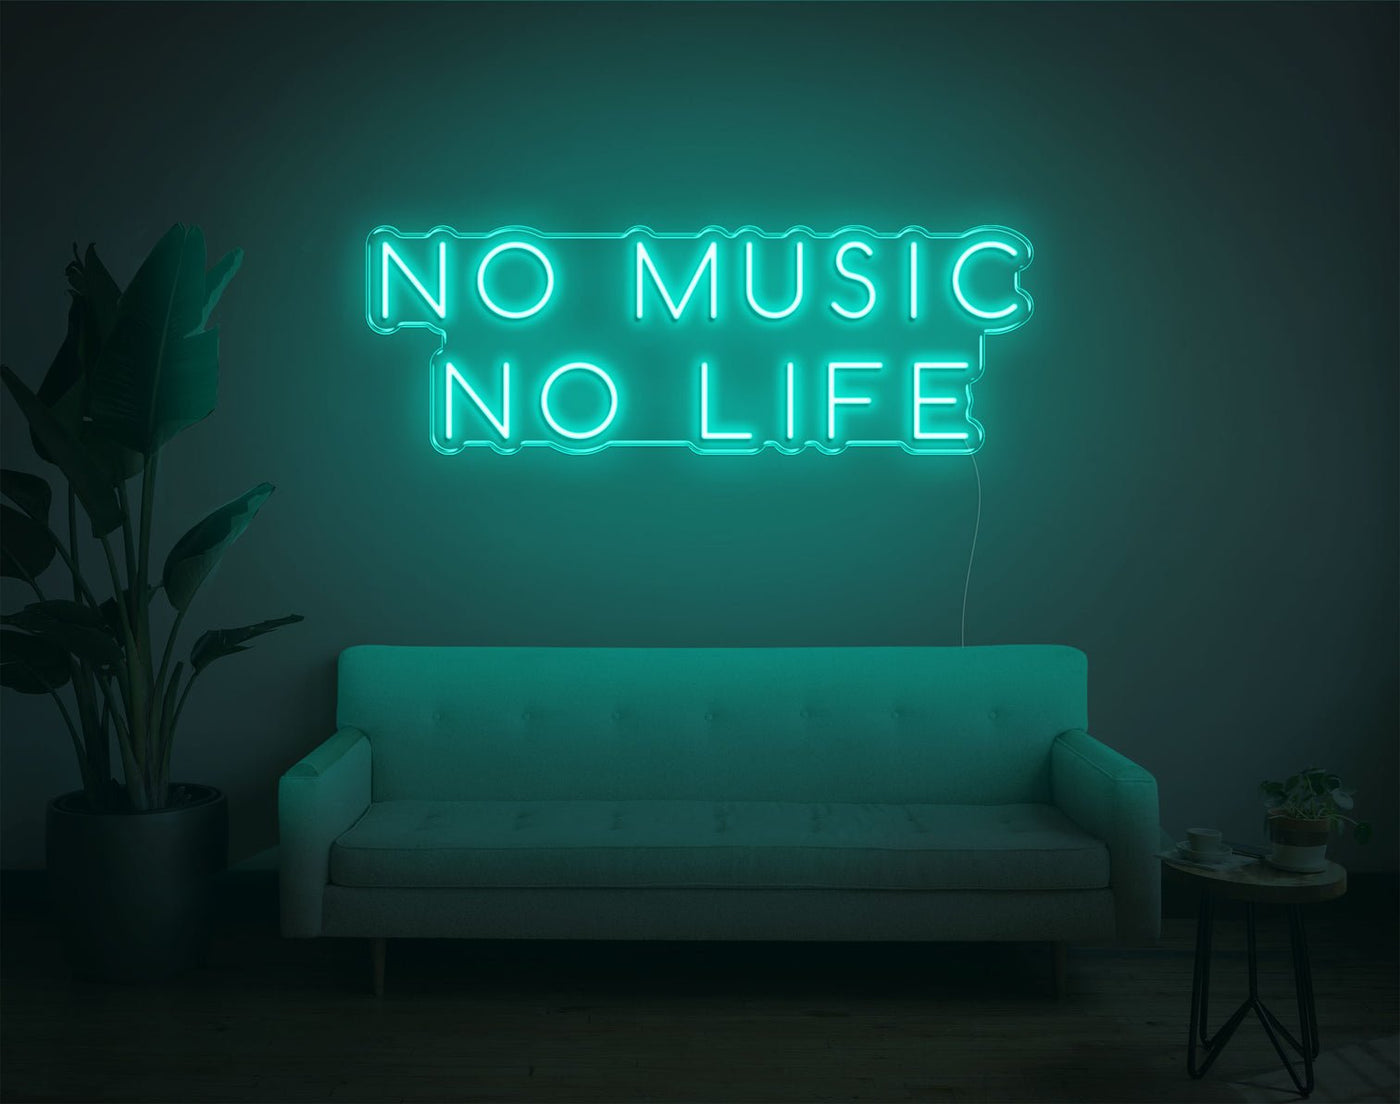 No Music No Life LED Neon Sign - 12inch x 34inchTurquoise